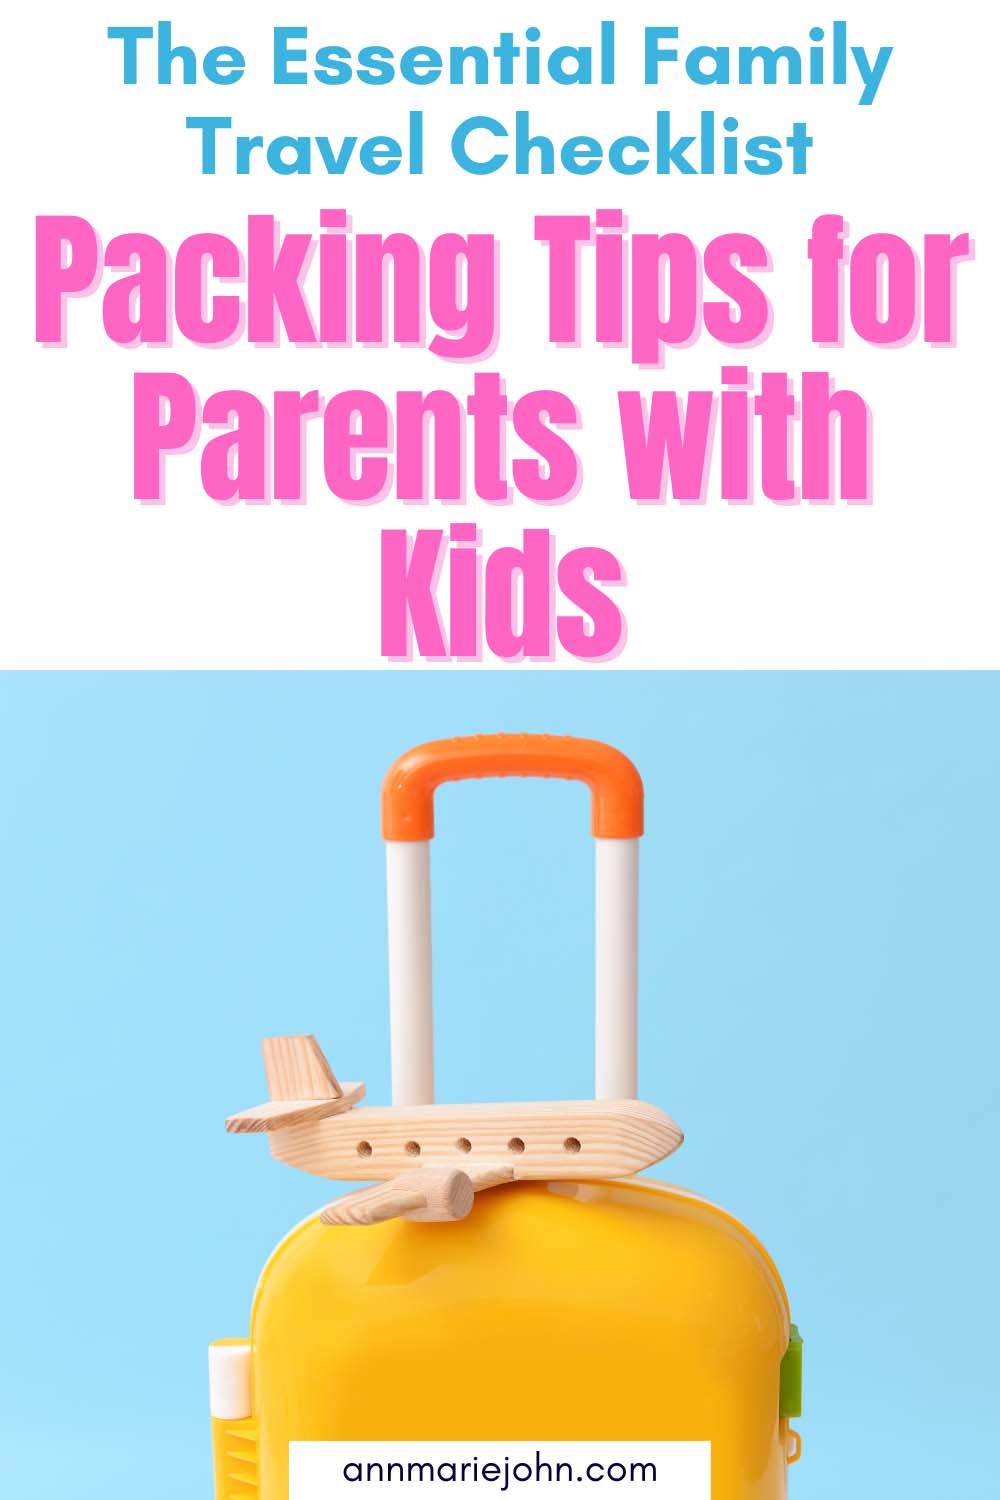 The Essential Family Travel Checklist: Packing Tips for Parents with Kids